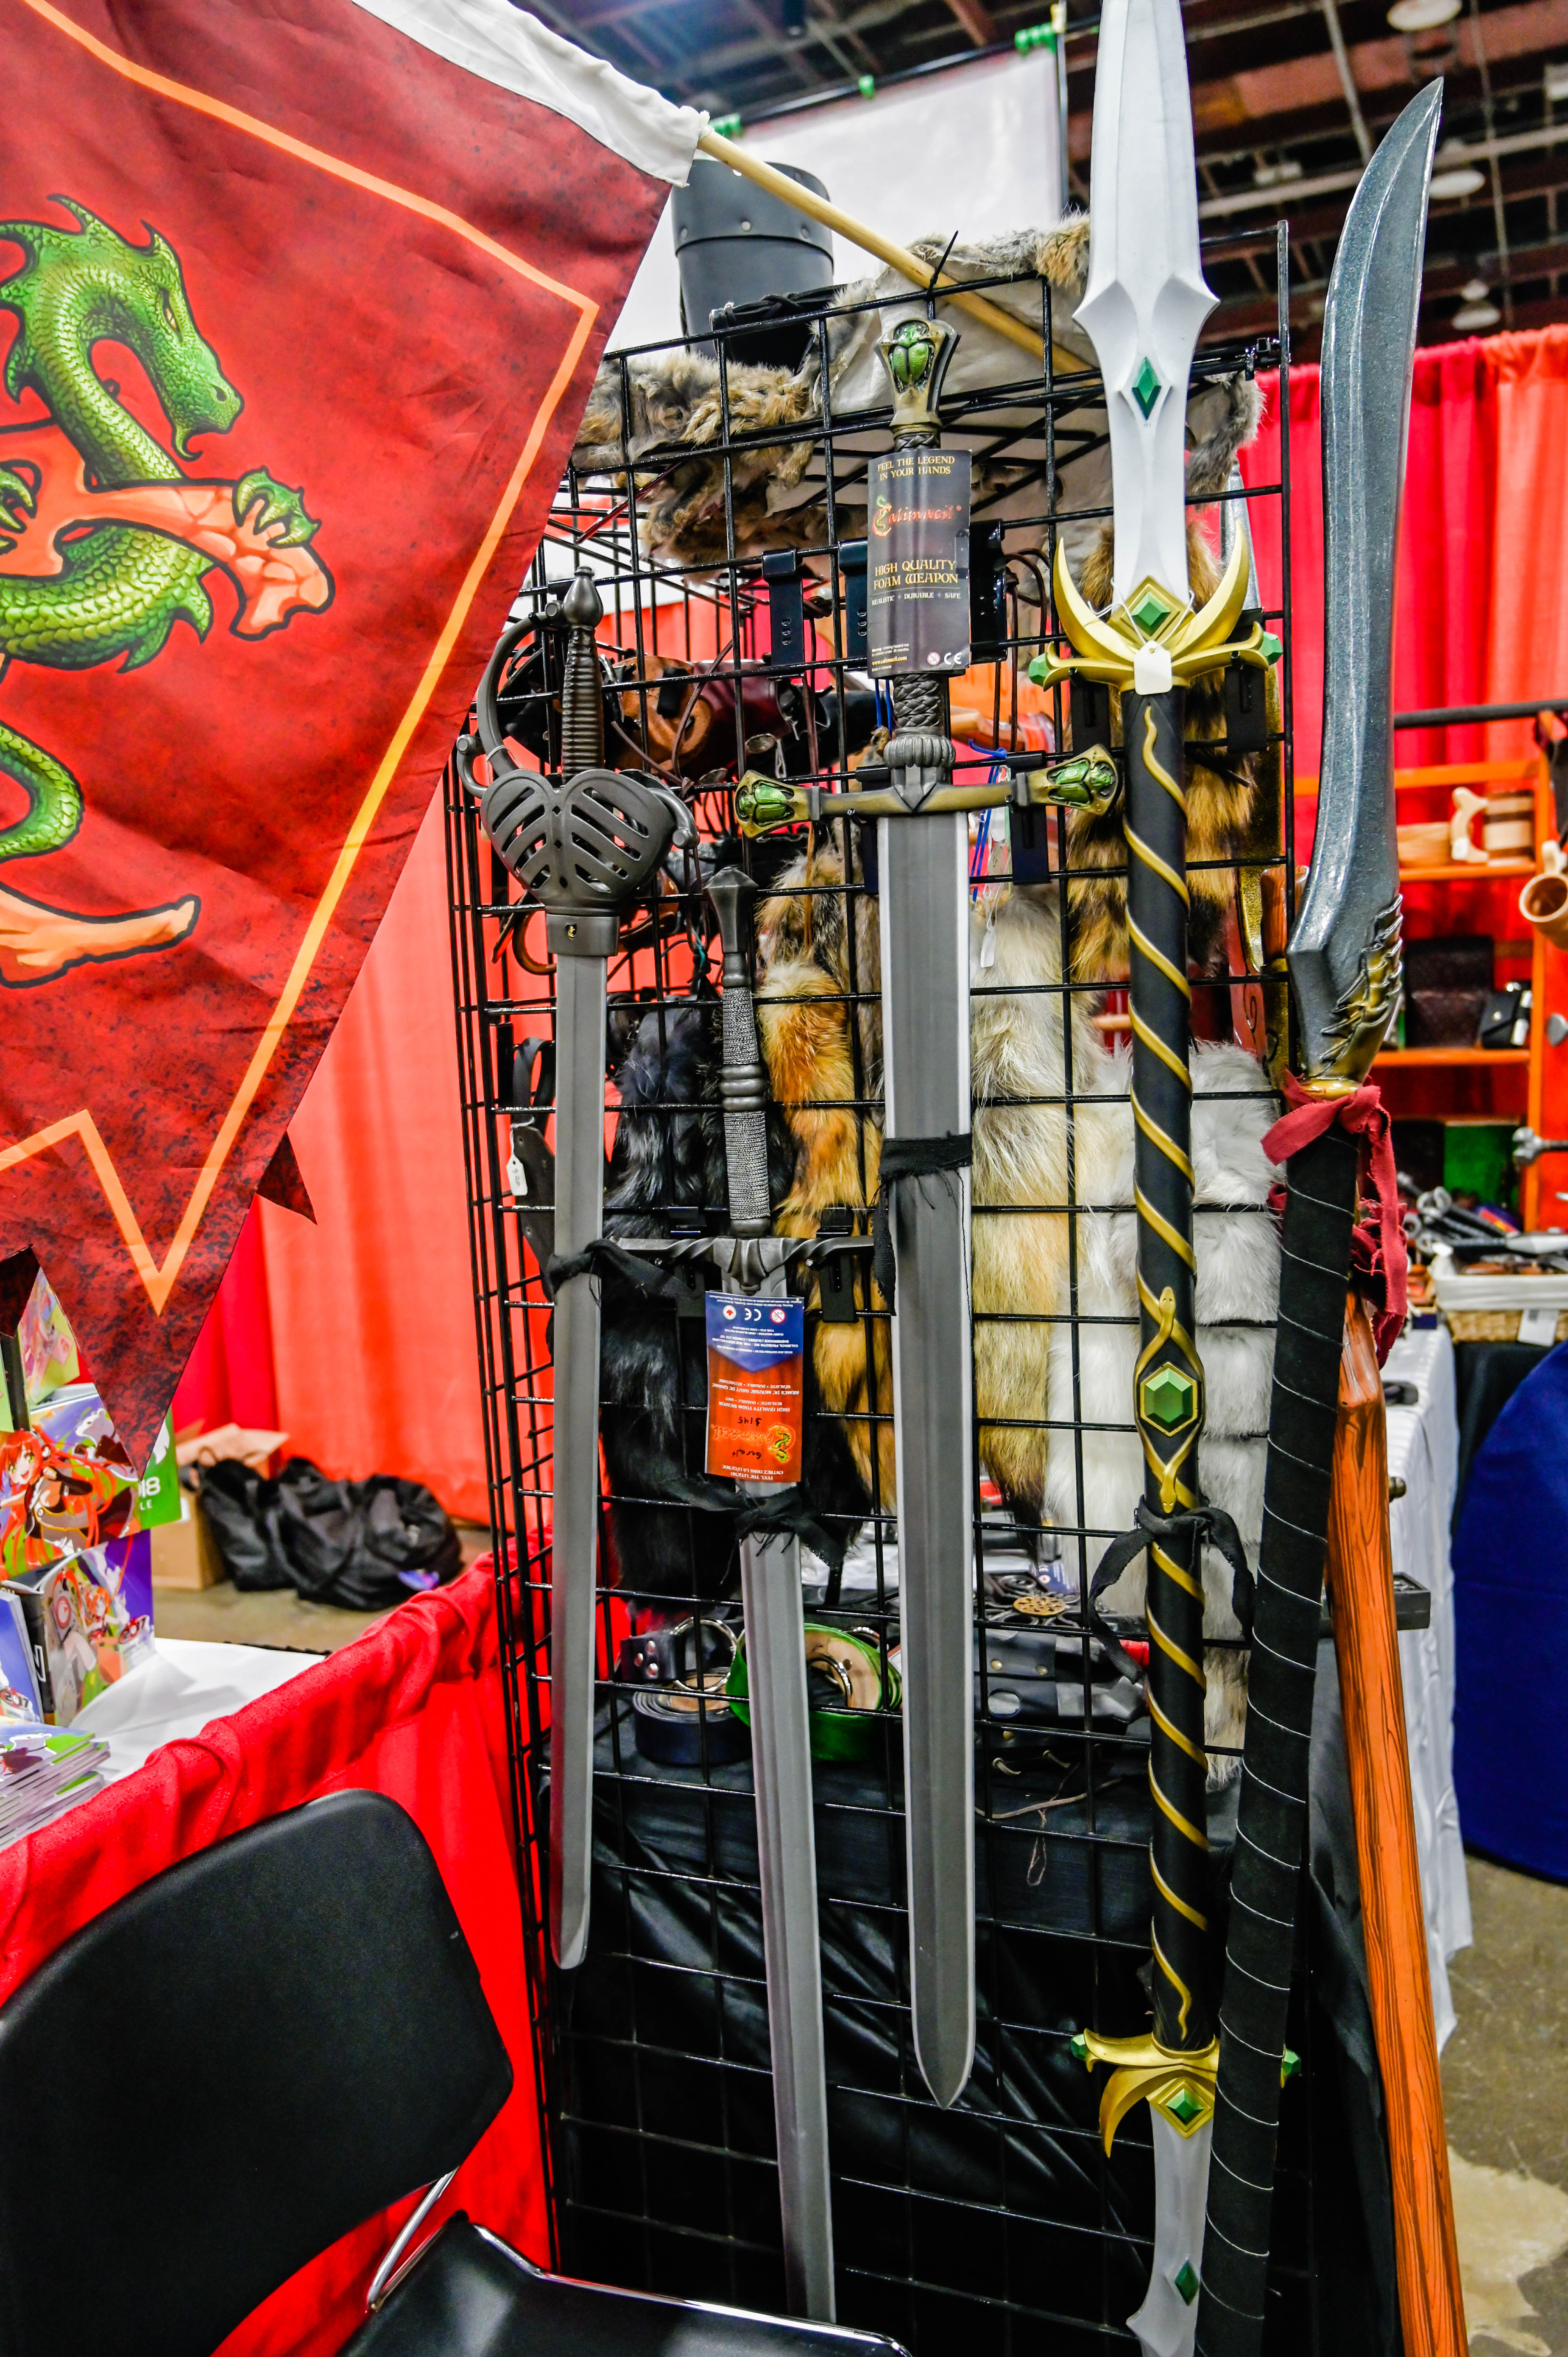 larptopia at youmacon with calimacil swords, spear, and epic armouy spear